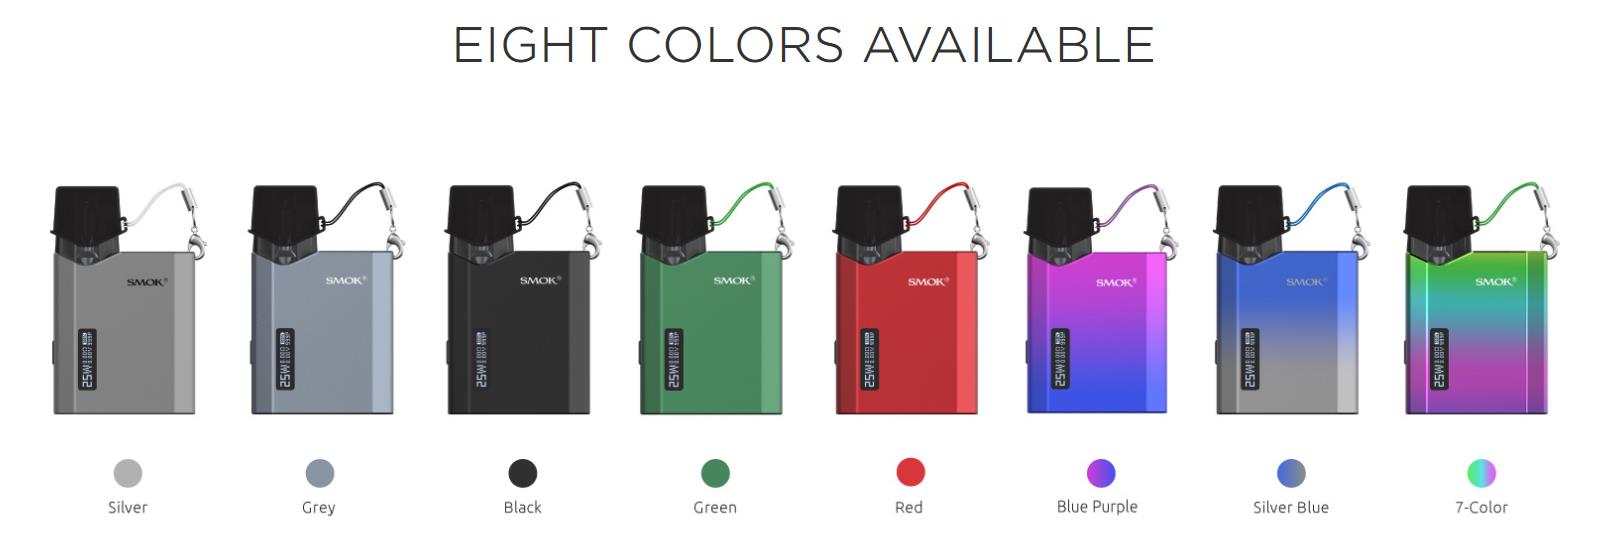 SMOK Nfix-mate - Available Colors